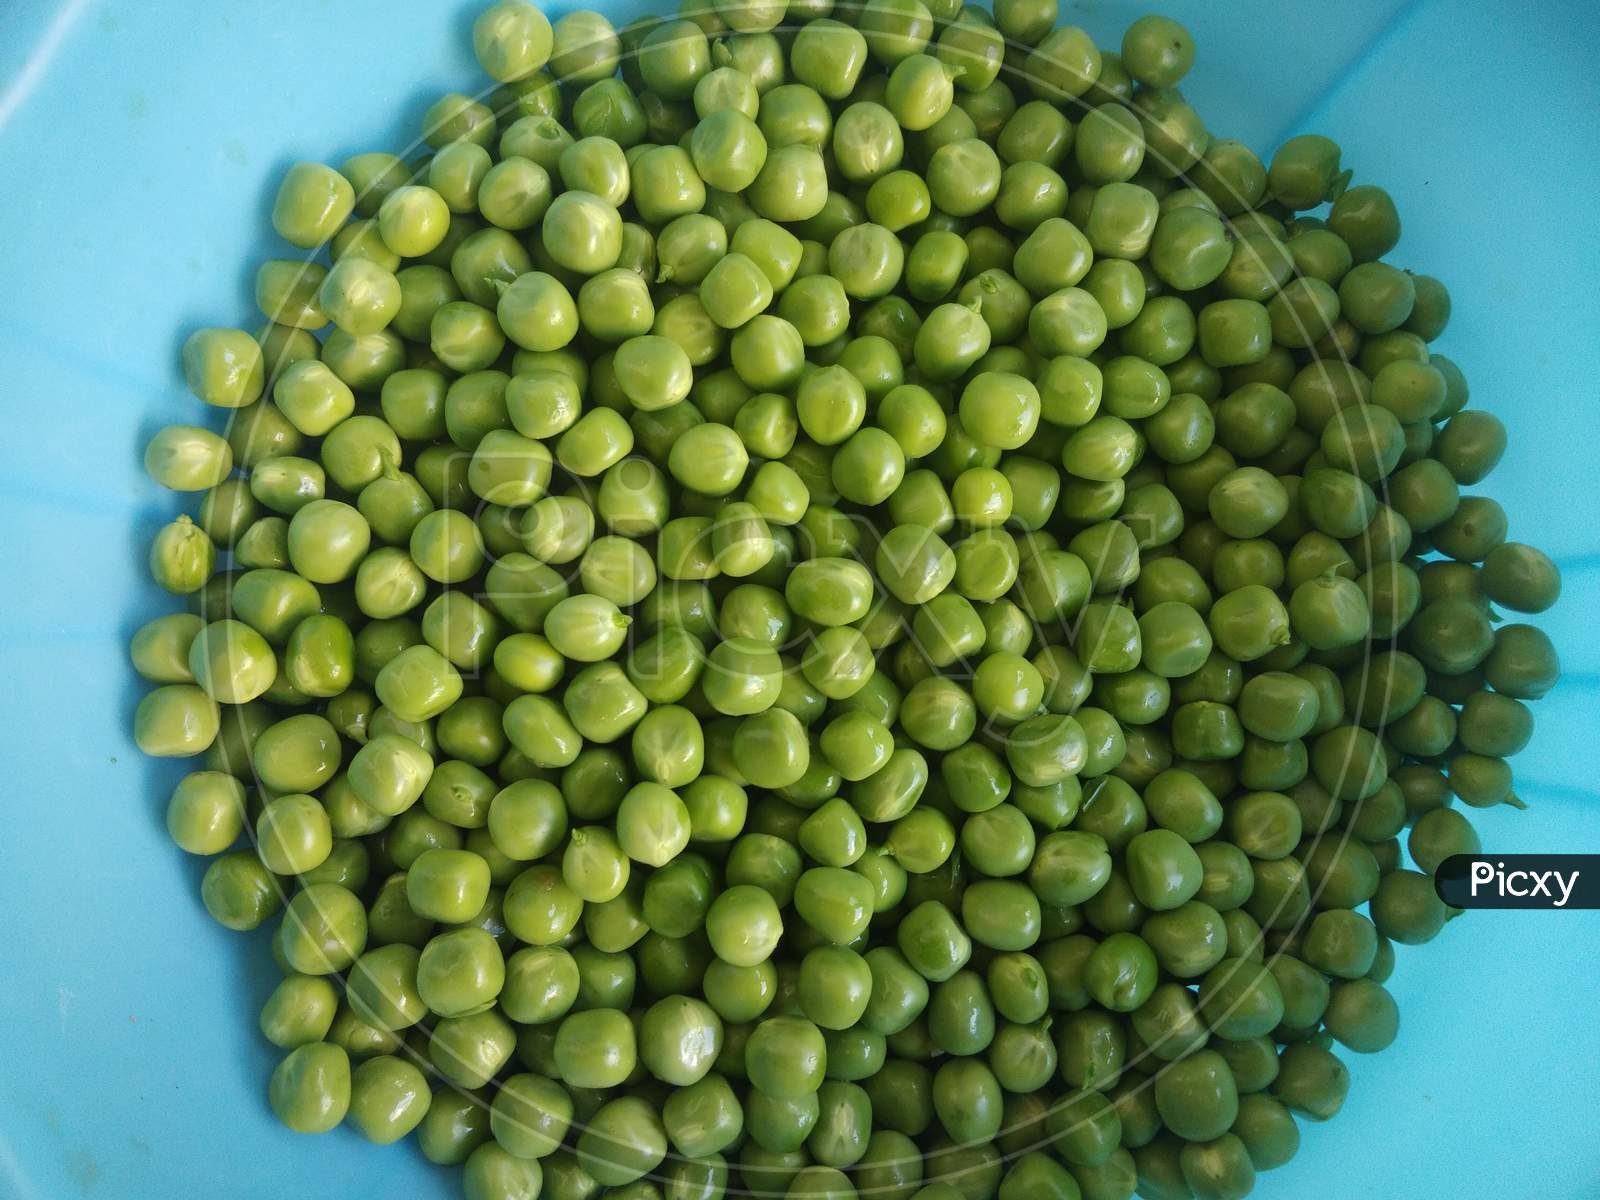 Pea grains in a pot, in the day time, in mirpur Azad Kashmir.